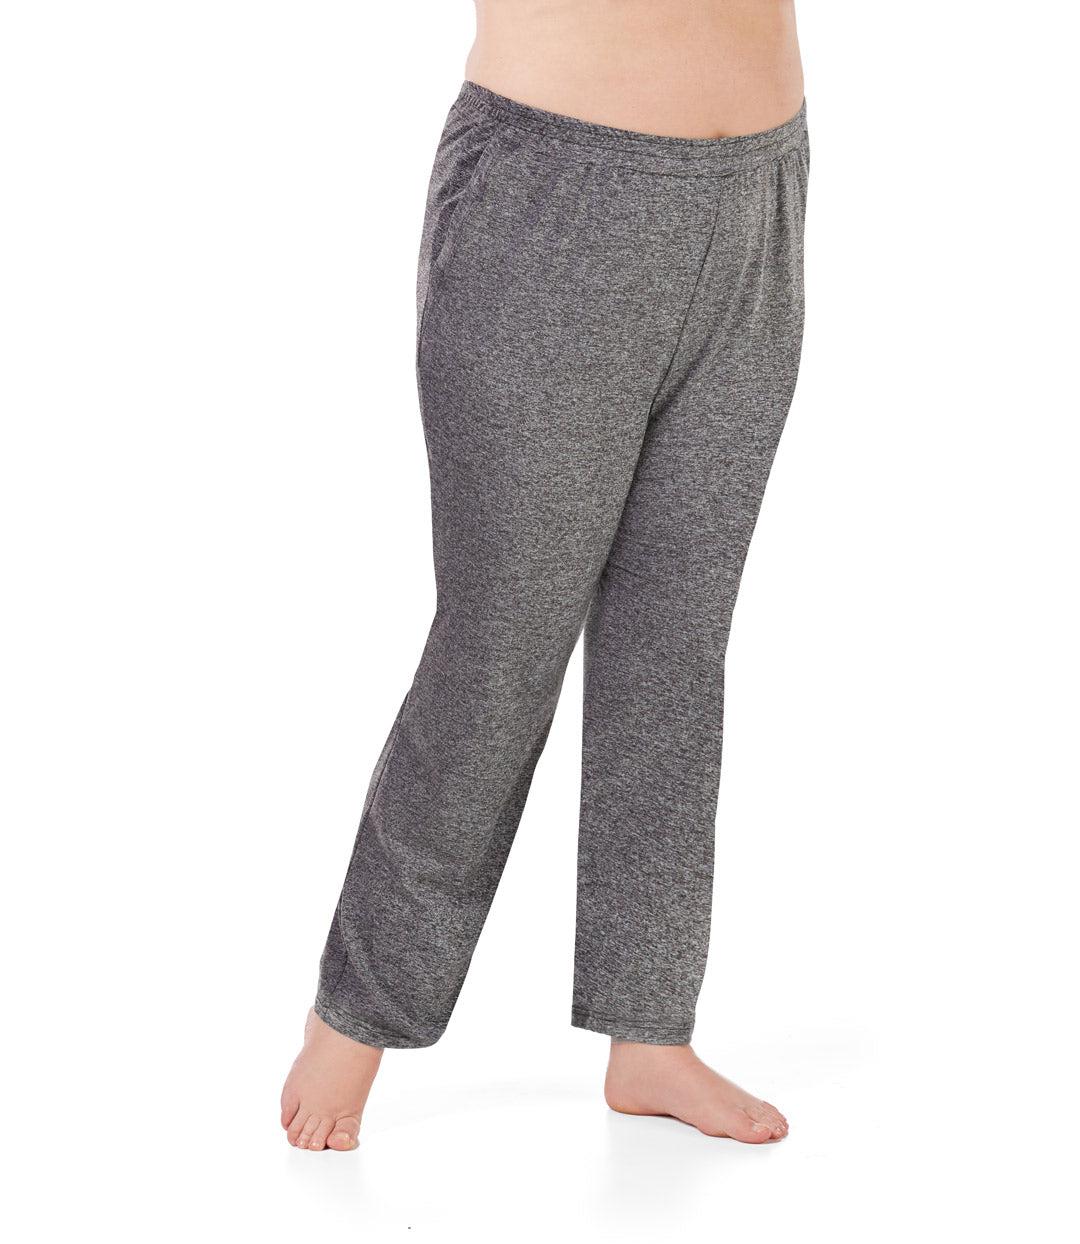 Bottom half of plus sized woman, front view, wearing JunoActive Softwik Pocketed Pant in color heather grey. Bottom hem is at the ankle.